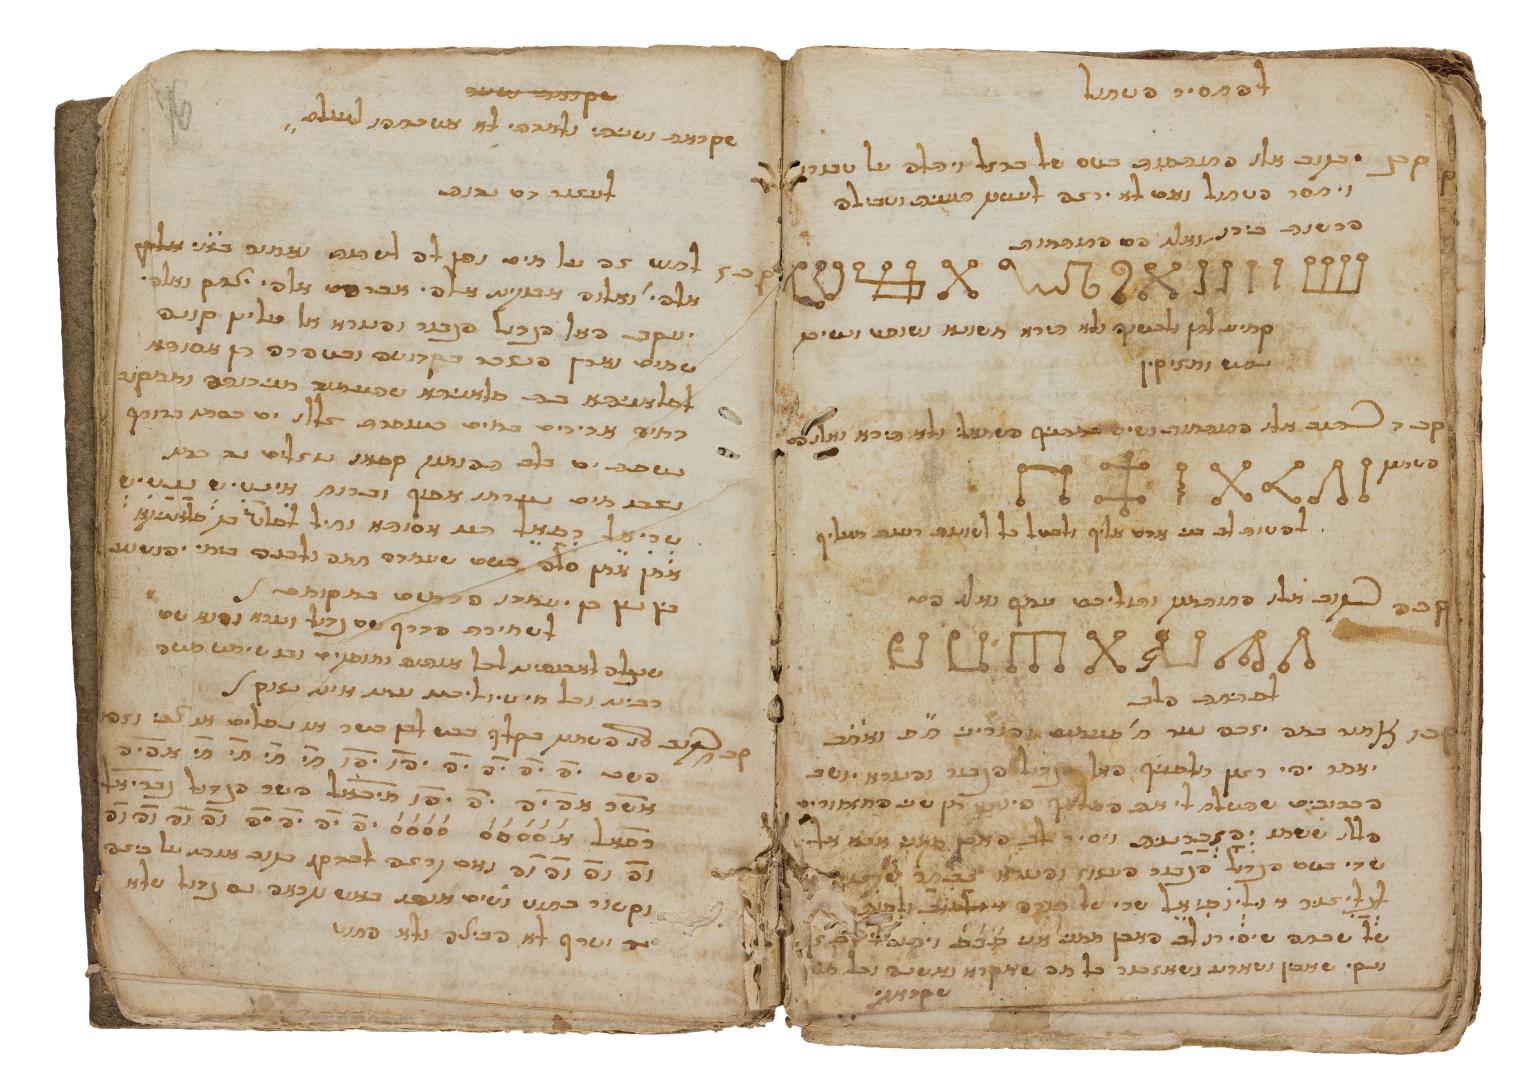 Facing-page manuscript with Hebrew text and letter formations. 